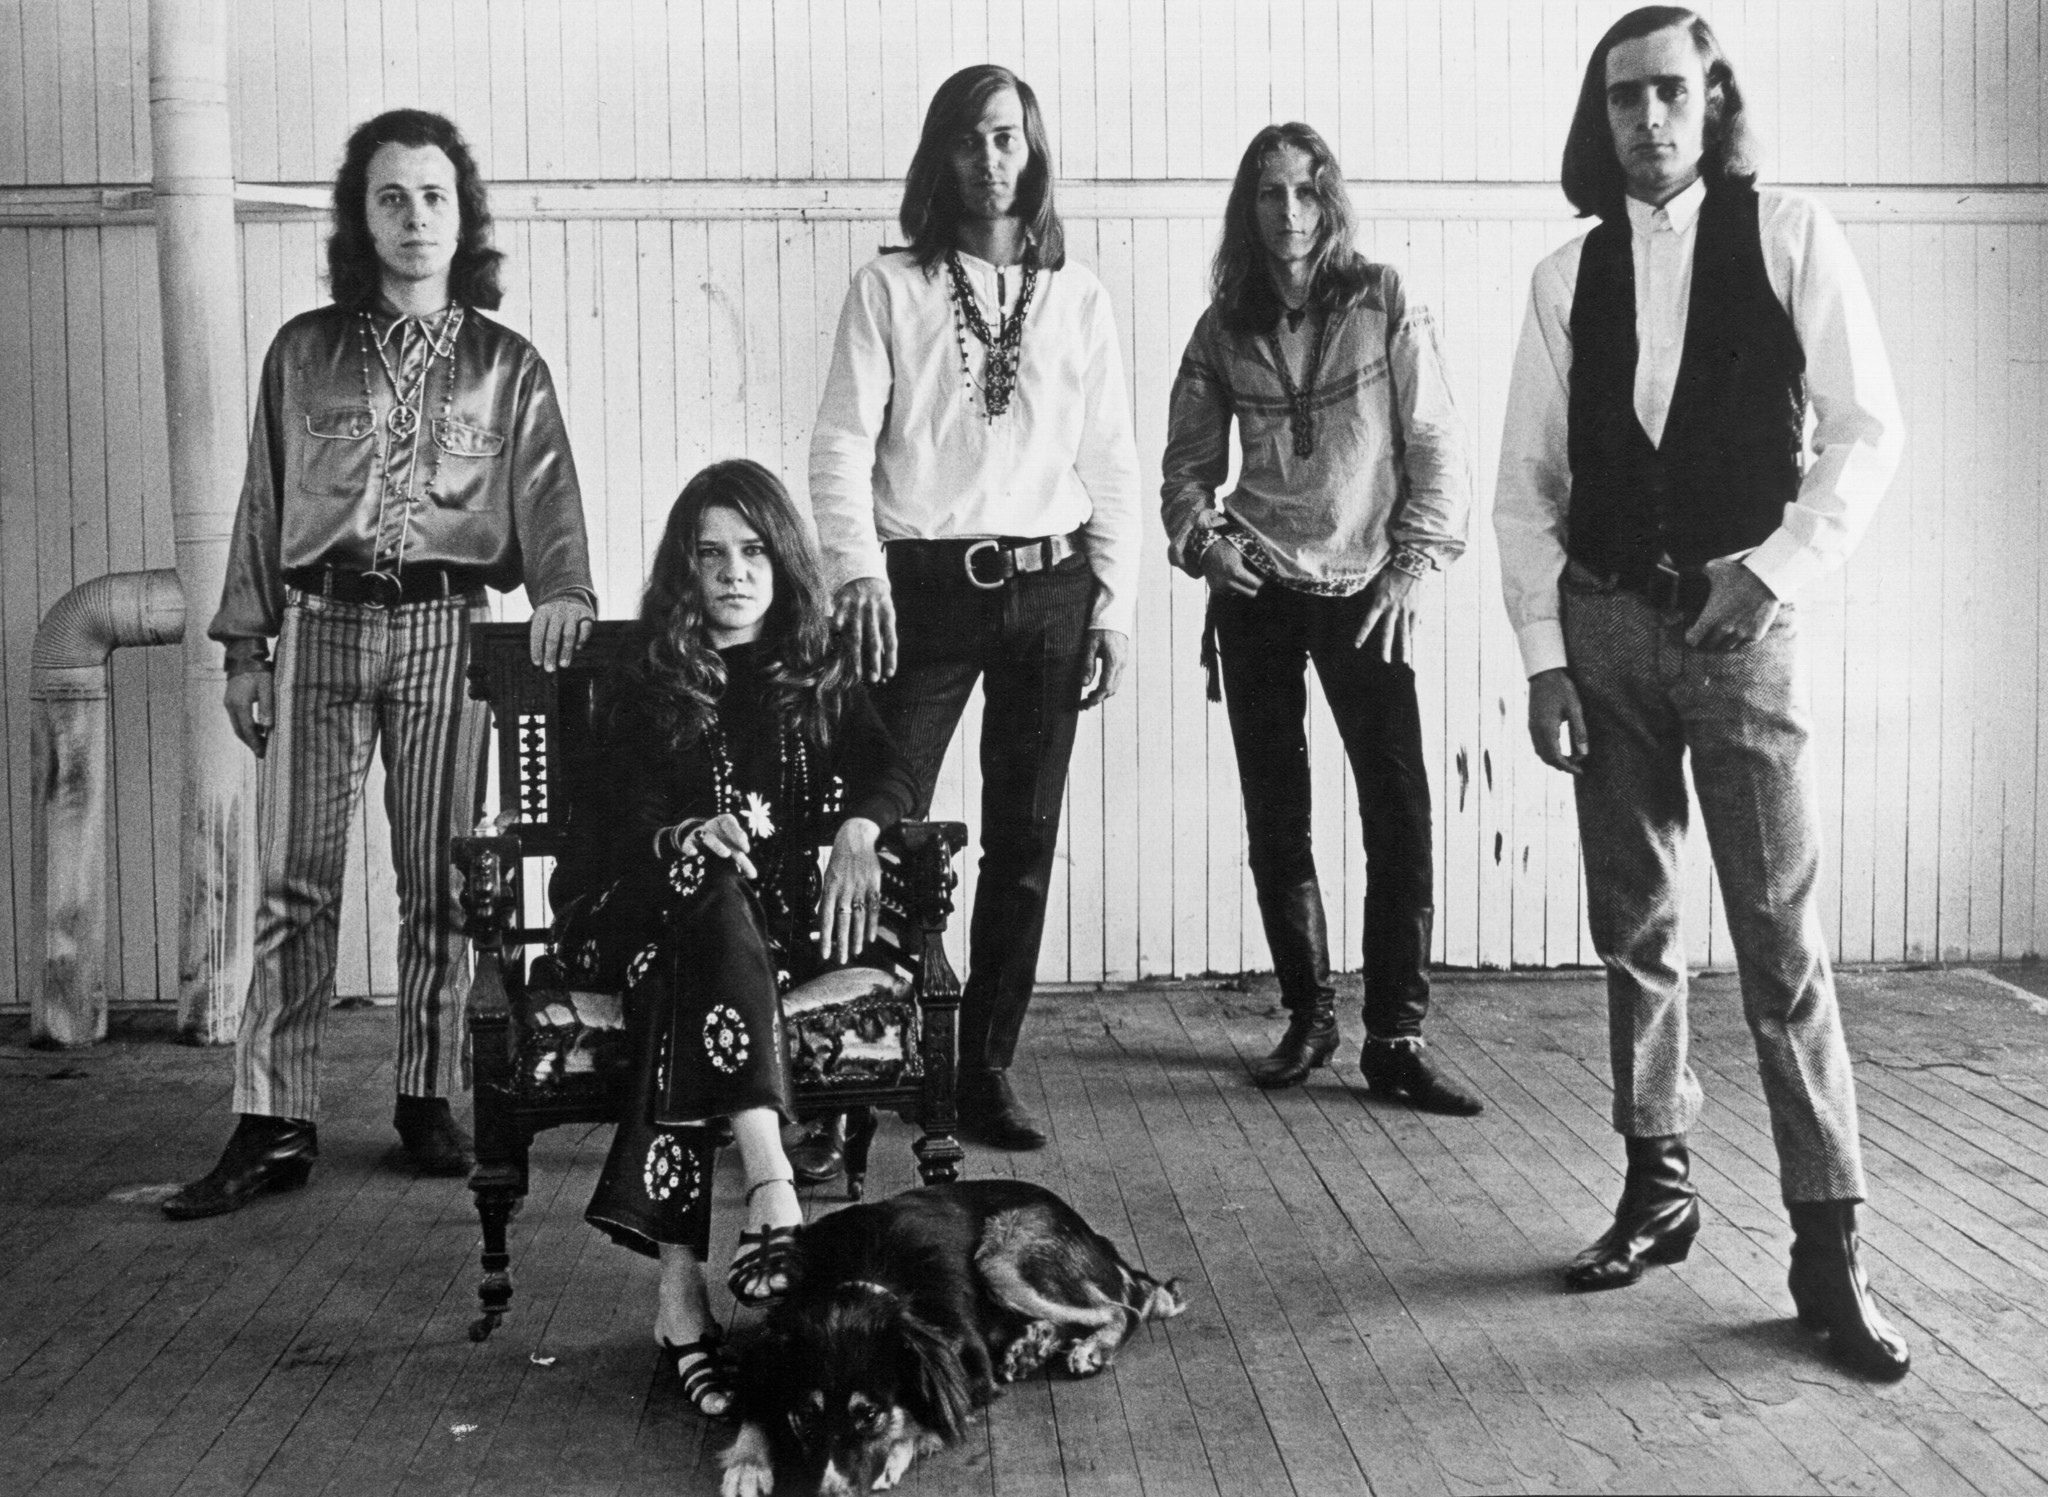 Janis Joplin and Big Brother and the Holding Company